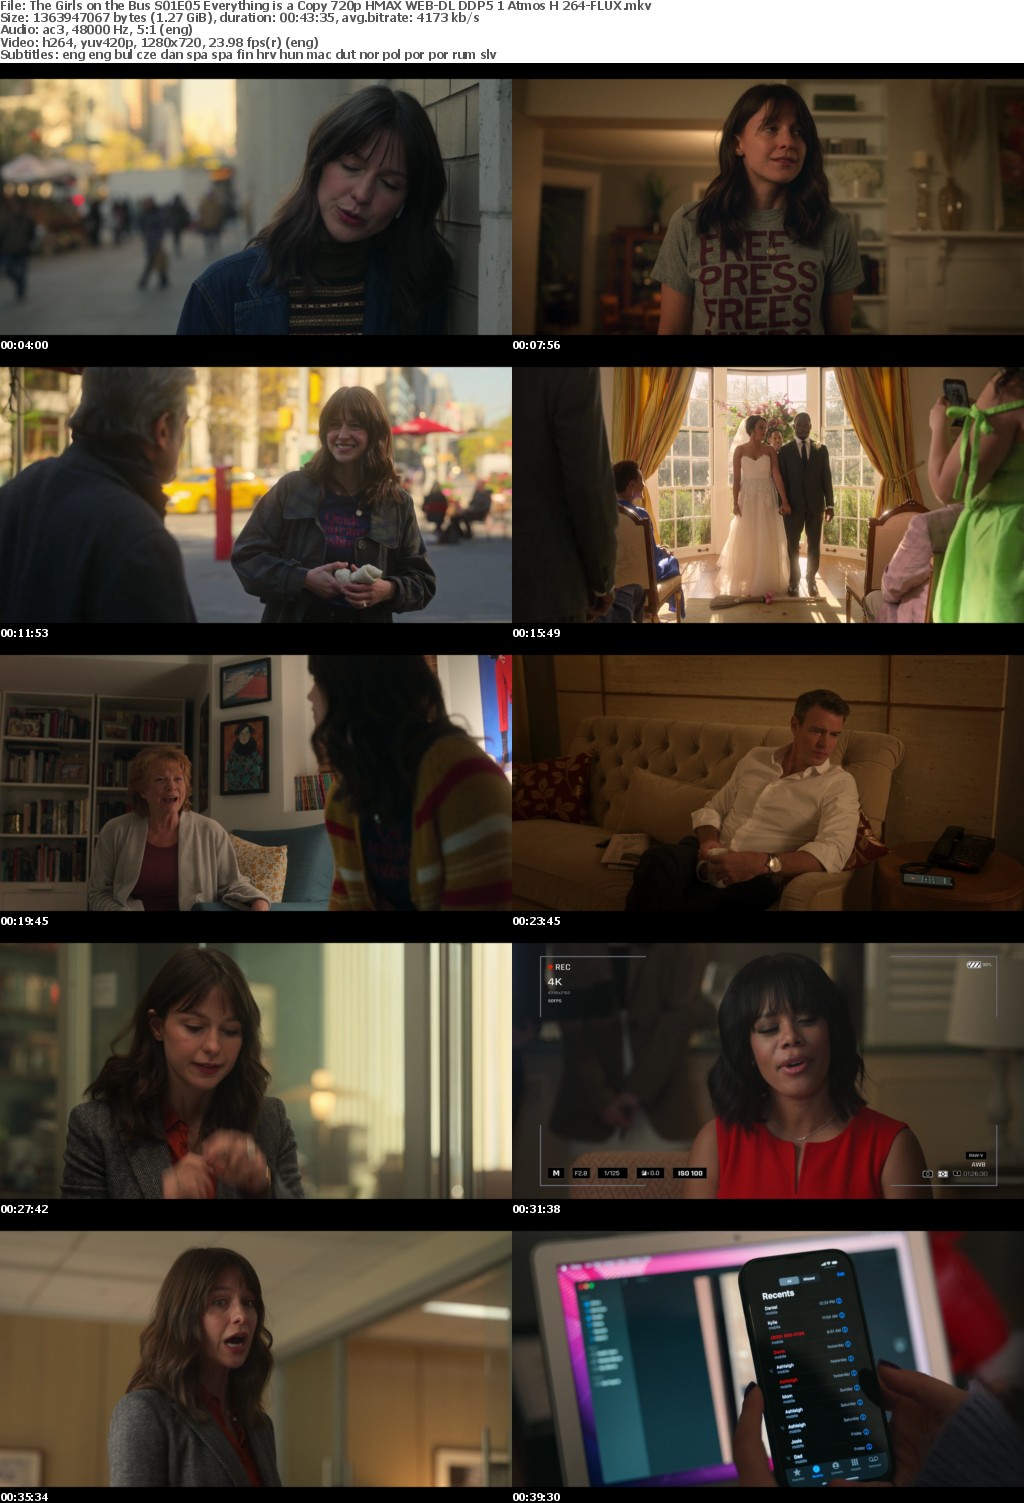 The Girls on the Bus S01E05 Everything is a Copy 720p HMAX WEB-DL DDP5 1 Atmos H 264-FLUX